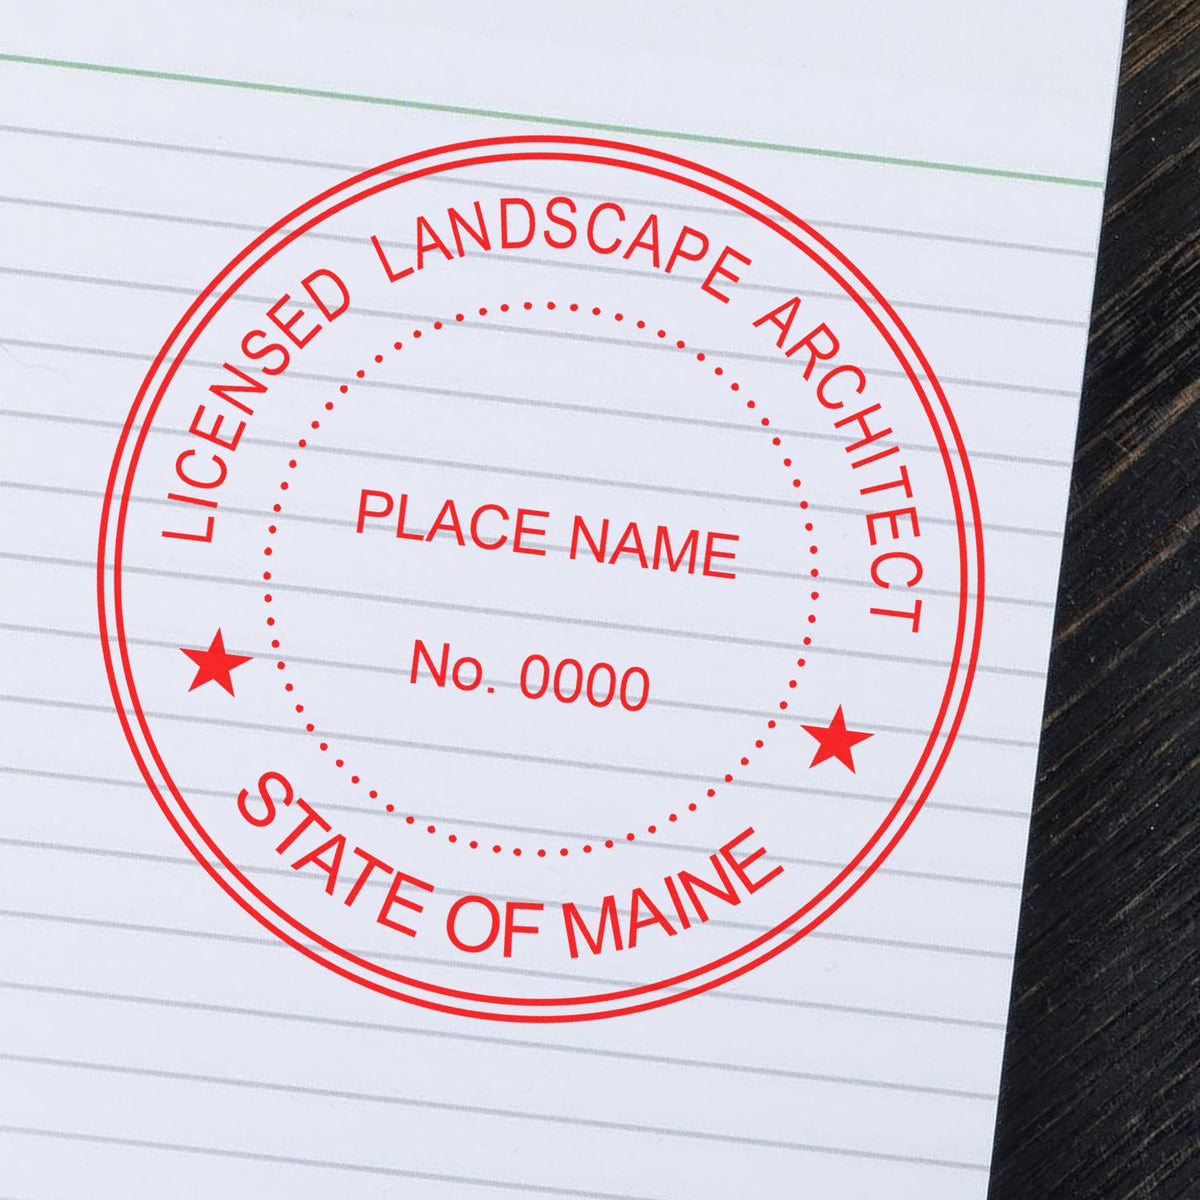 The Maine Landscape Architectural Seal Stamp stamp impression comes to life with a crisp, detailed photo on paper - showcasing true professional quality.